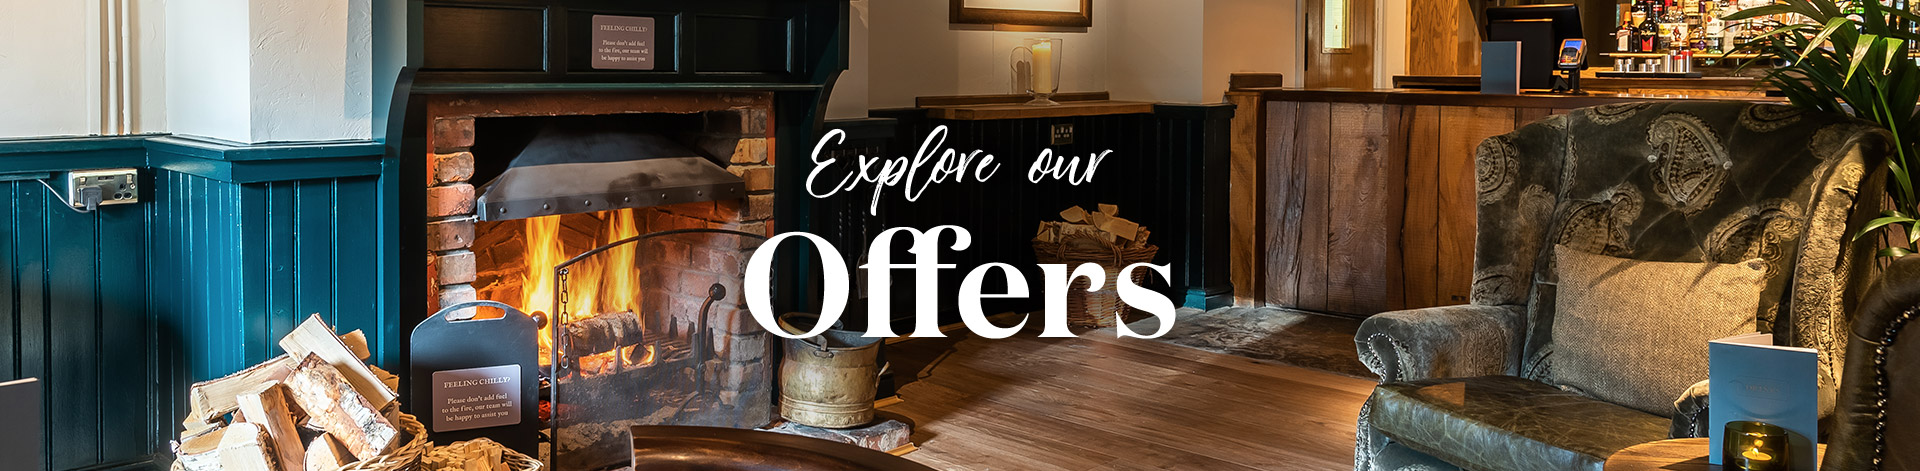 Our latest offers at The Oaken Arms